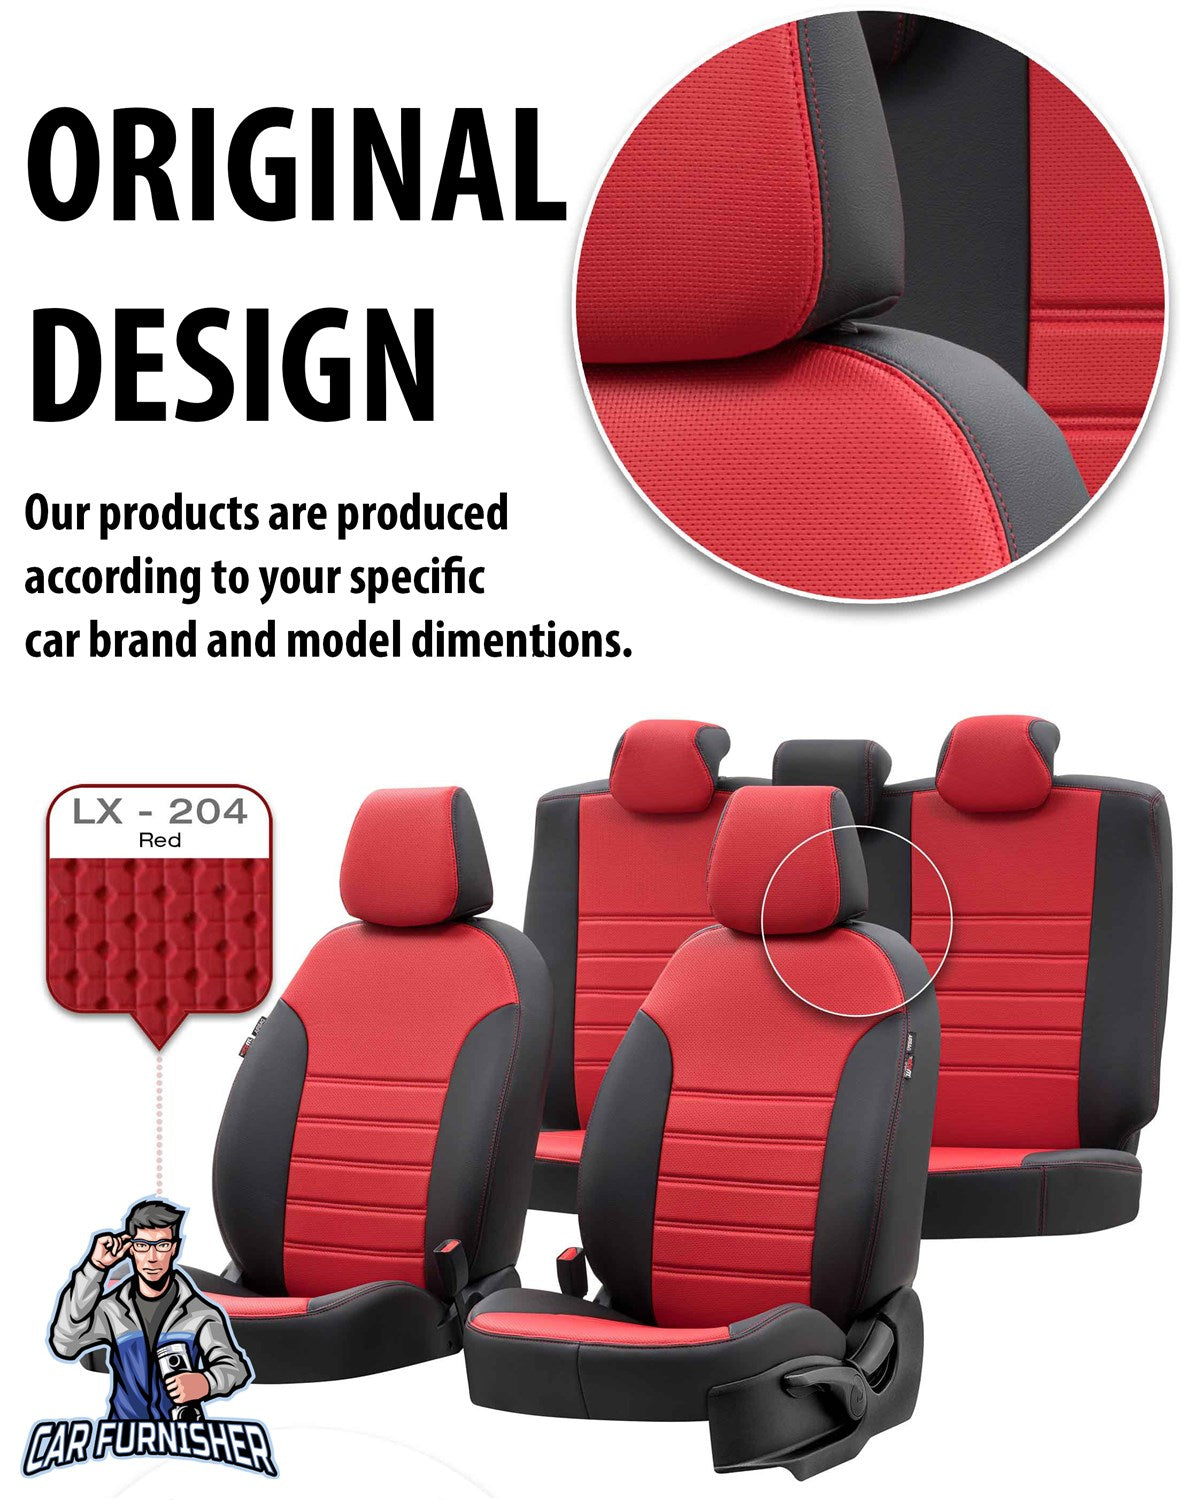 Nissan Qashqai Seat Covers New York Leather Design Smoked Black Leather